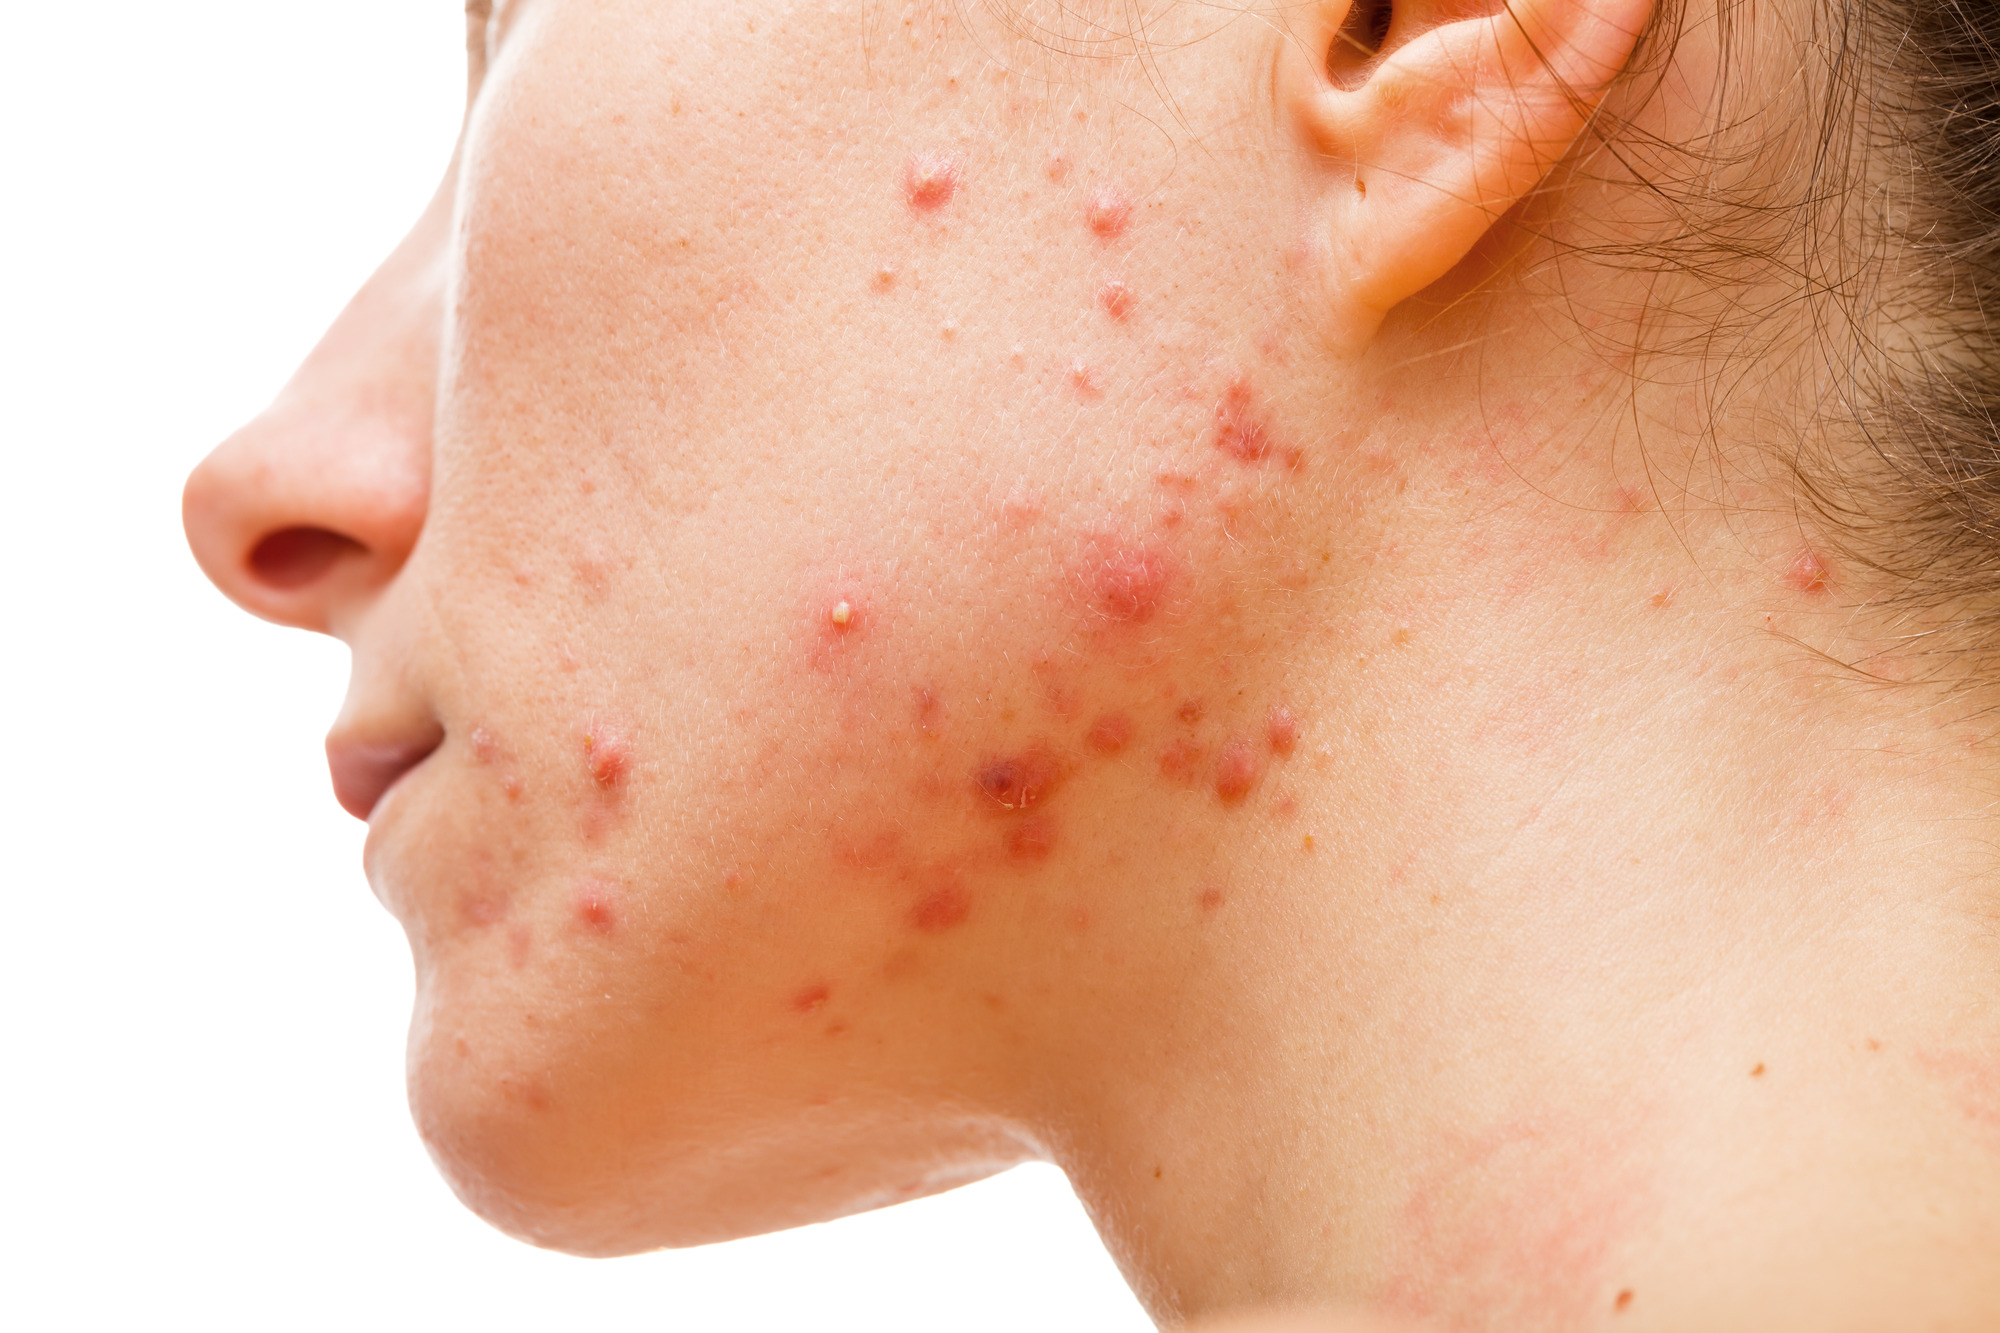 Photo of a cystic acne on a woman's face